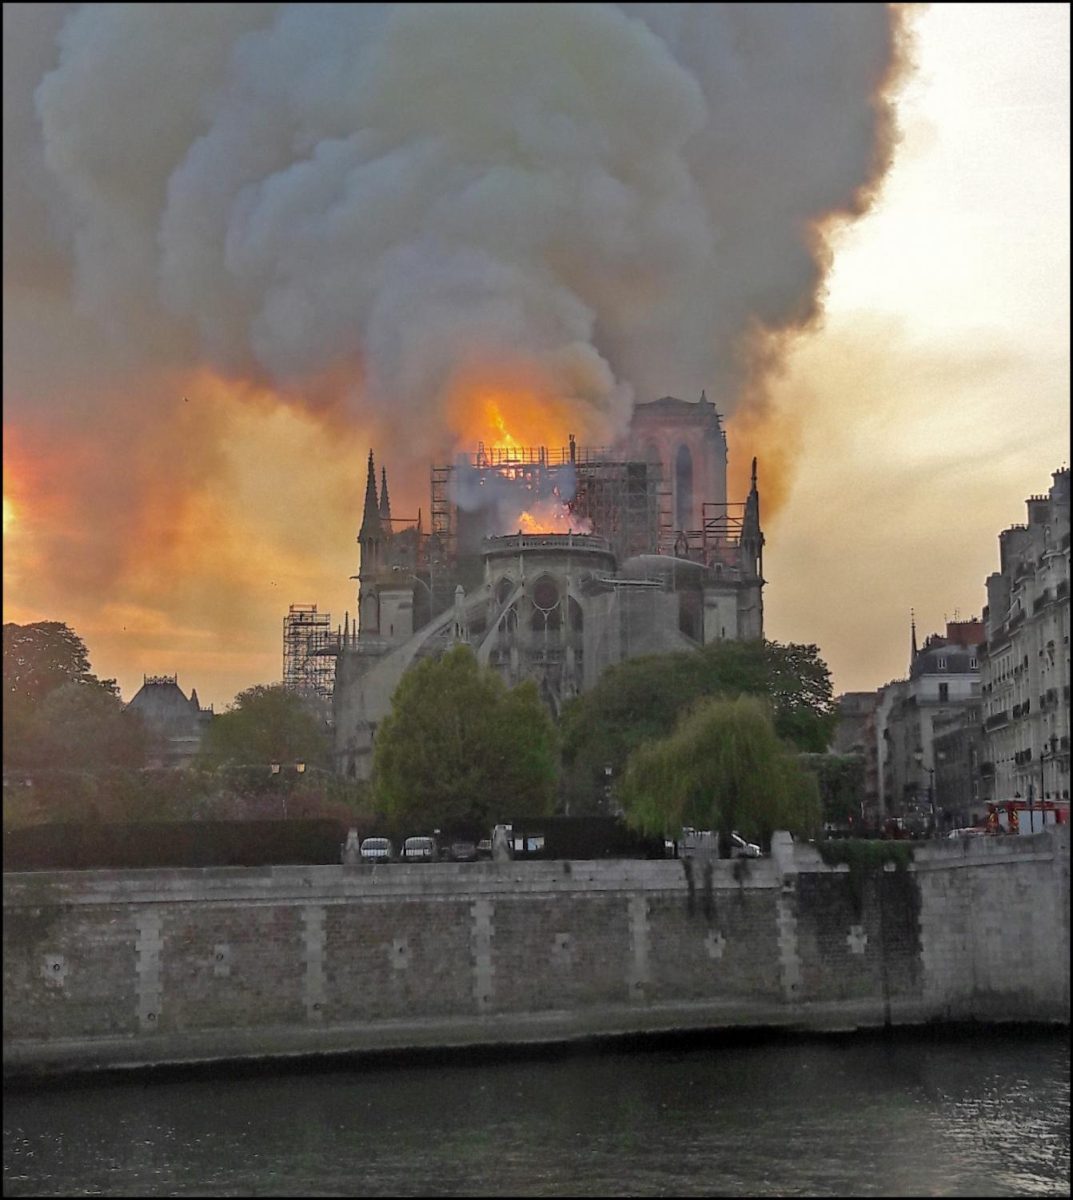 The+world+watched+as+Notre+Dame+cathedral+in+Paris+burned+Monday+evening.+It+will+take+billions+of+dollars+and+many+years+to+restore+the+850-year-old+structure.+Photo+courtesy+of+Wikimedia+Commons